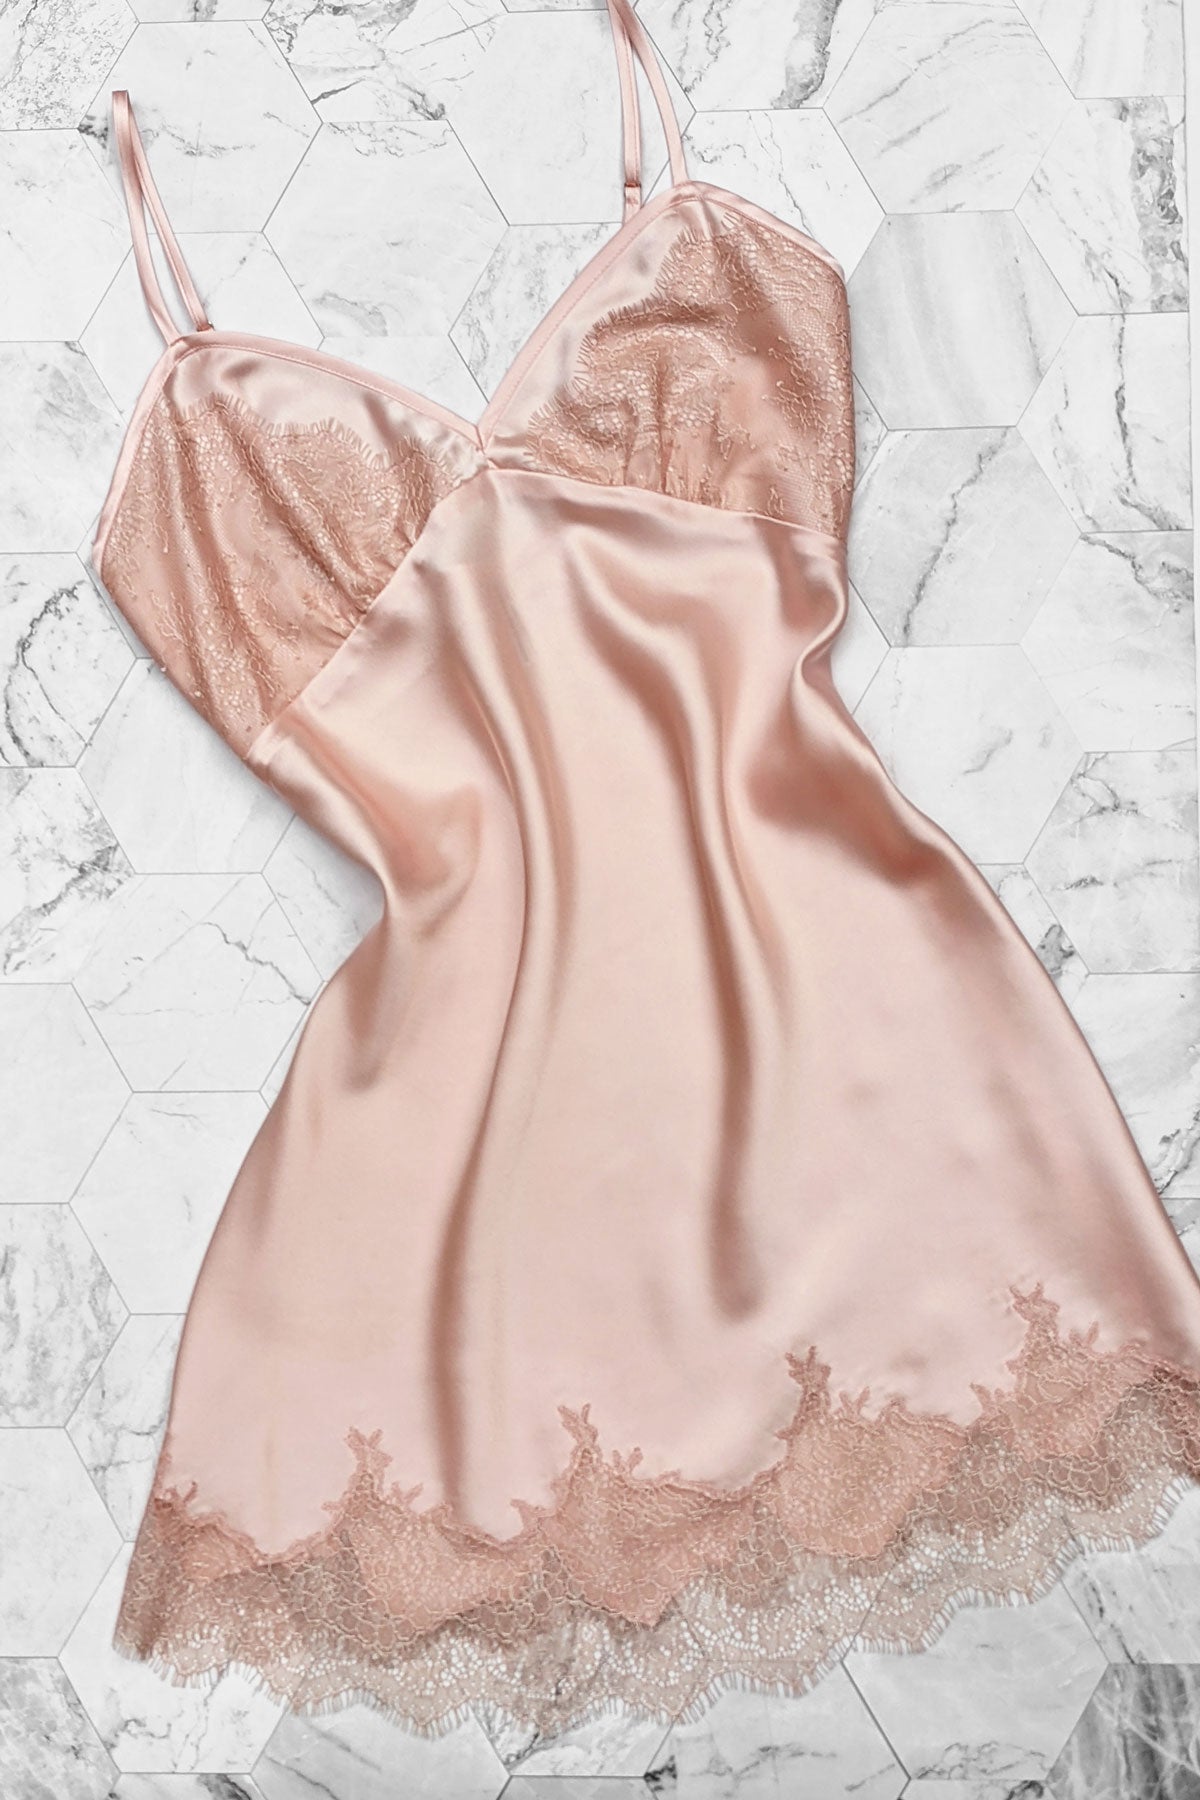 Pink silk slip dress with couture lace applique edging